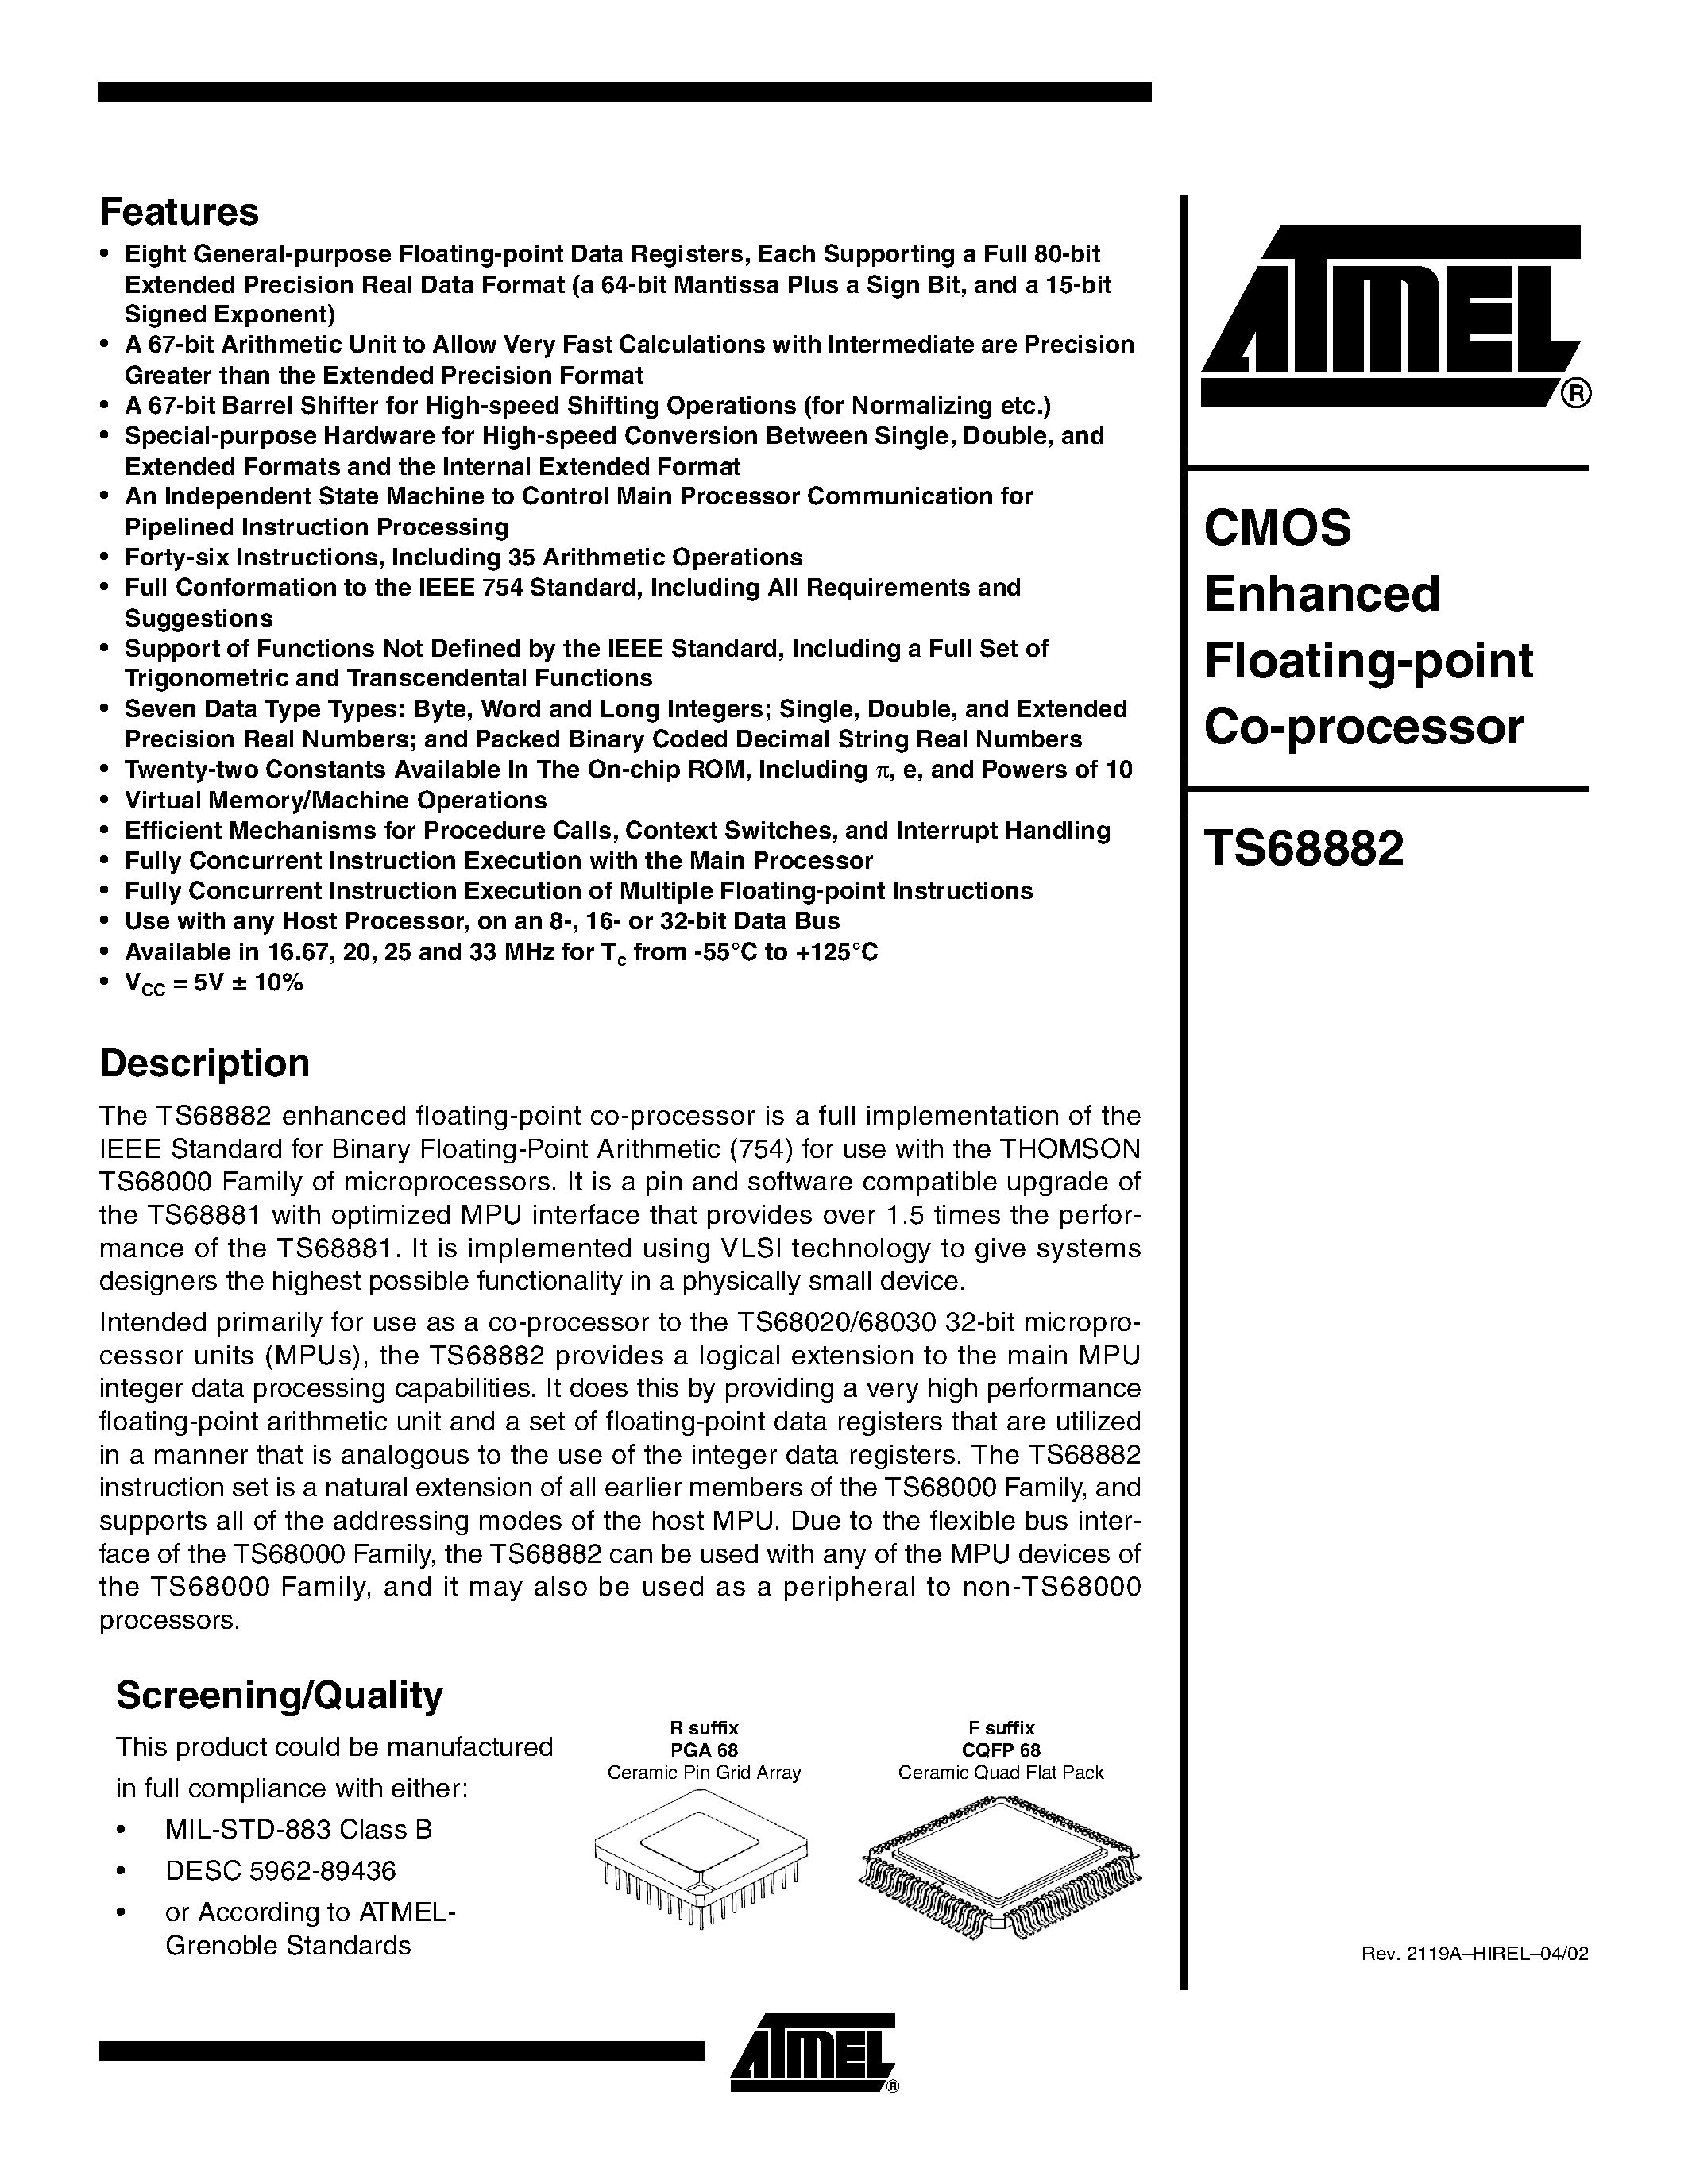 Datasheet TS68882MR33 - CMOS Enhanced Floating-point Co-processor page 1